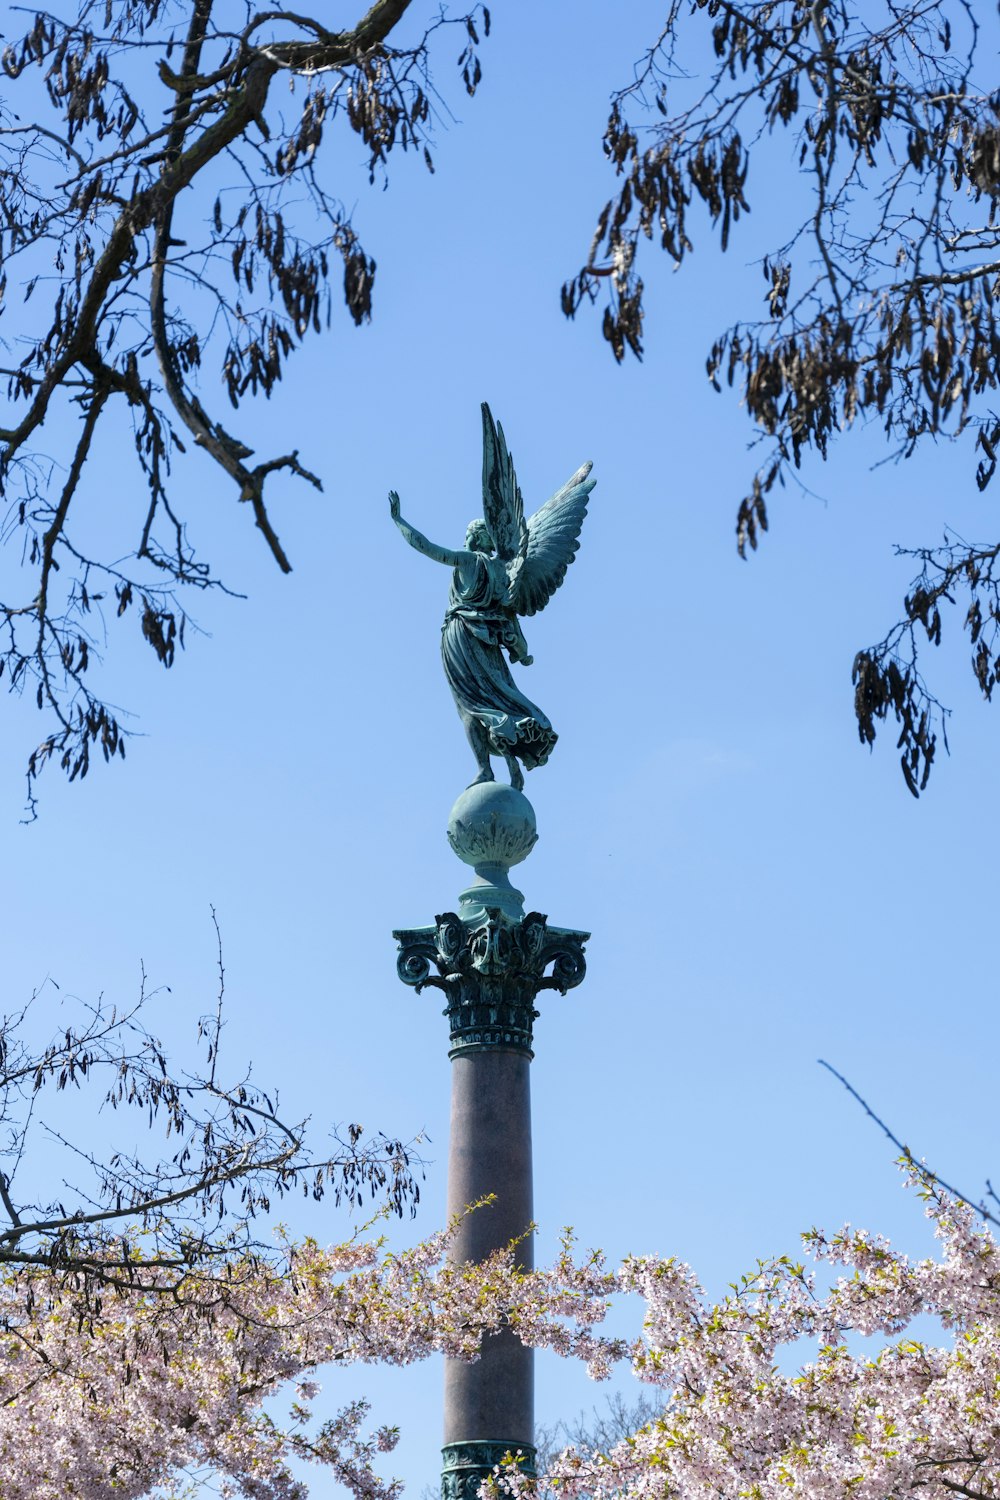 a statue on top of a light pole in a park